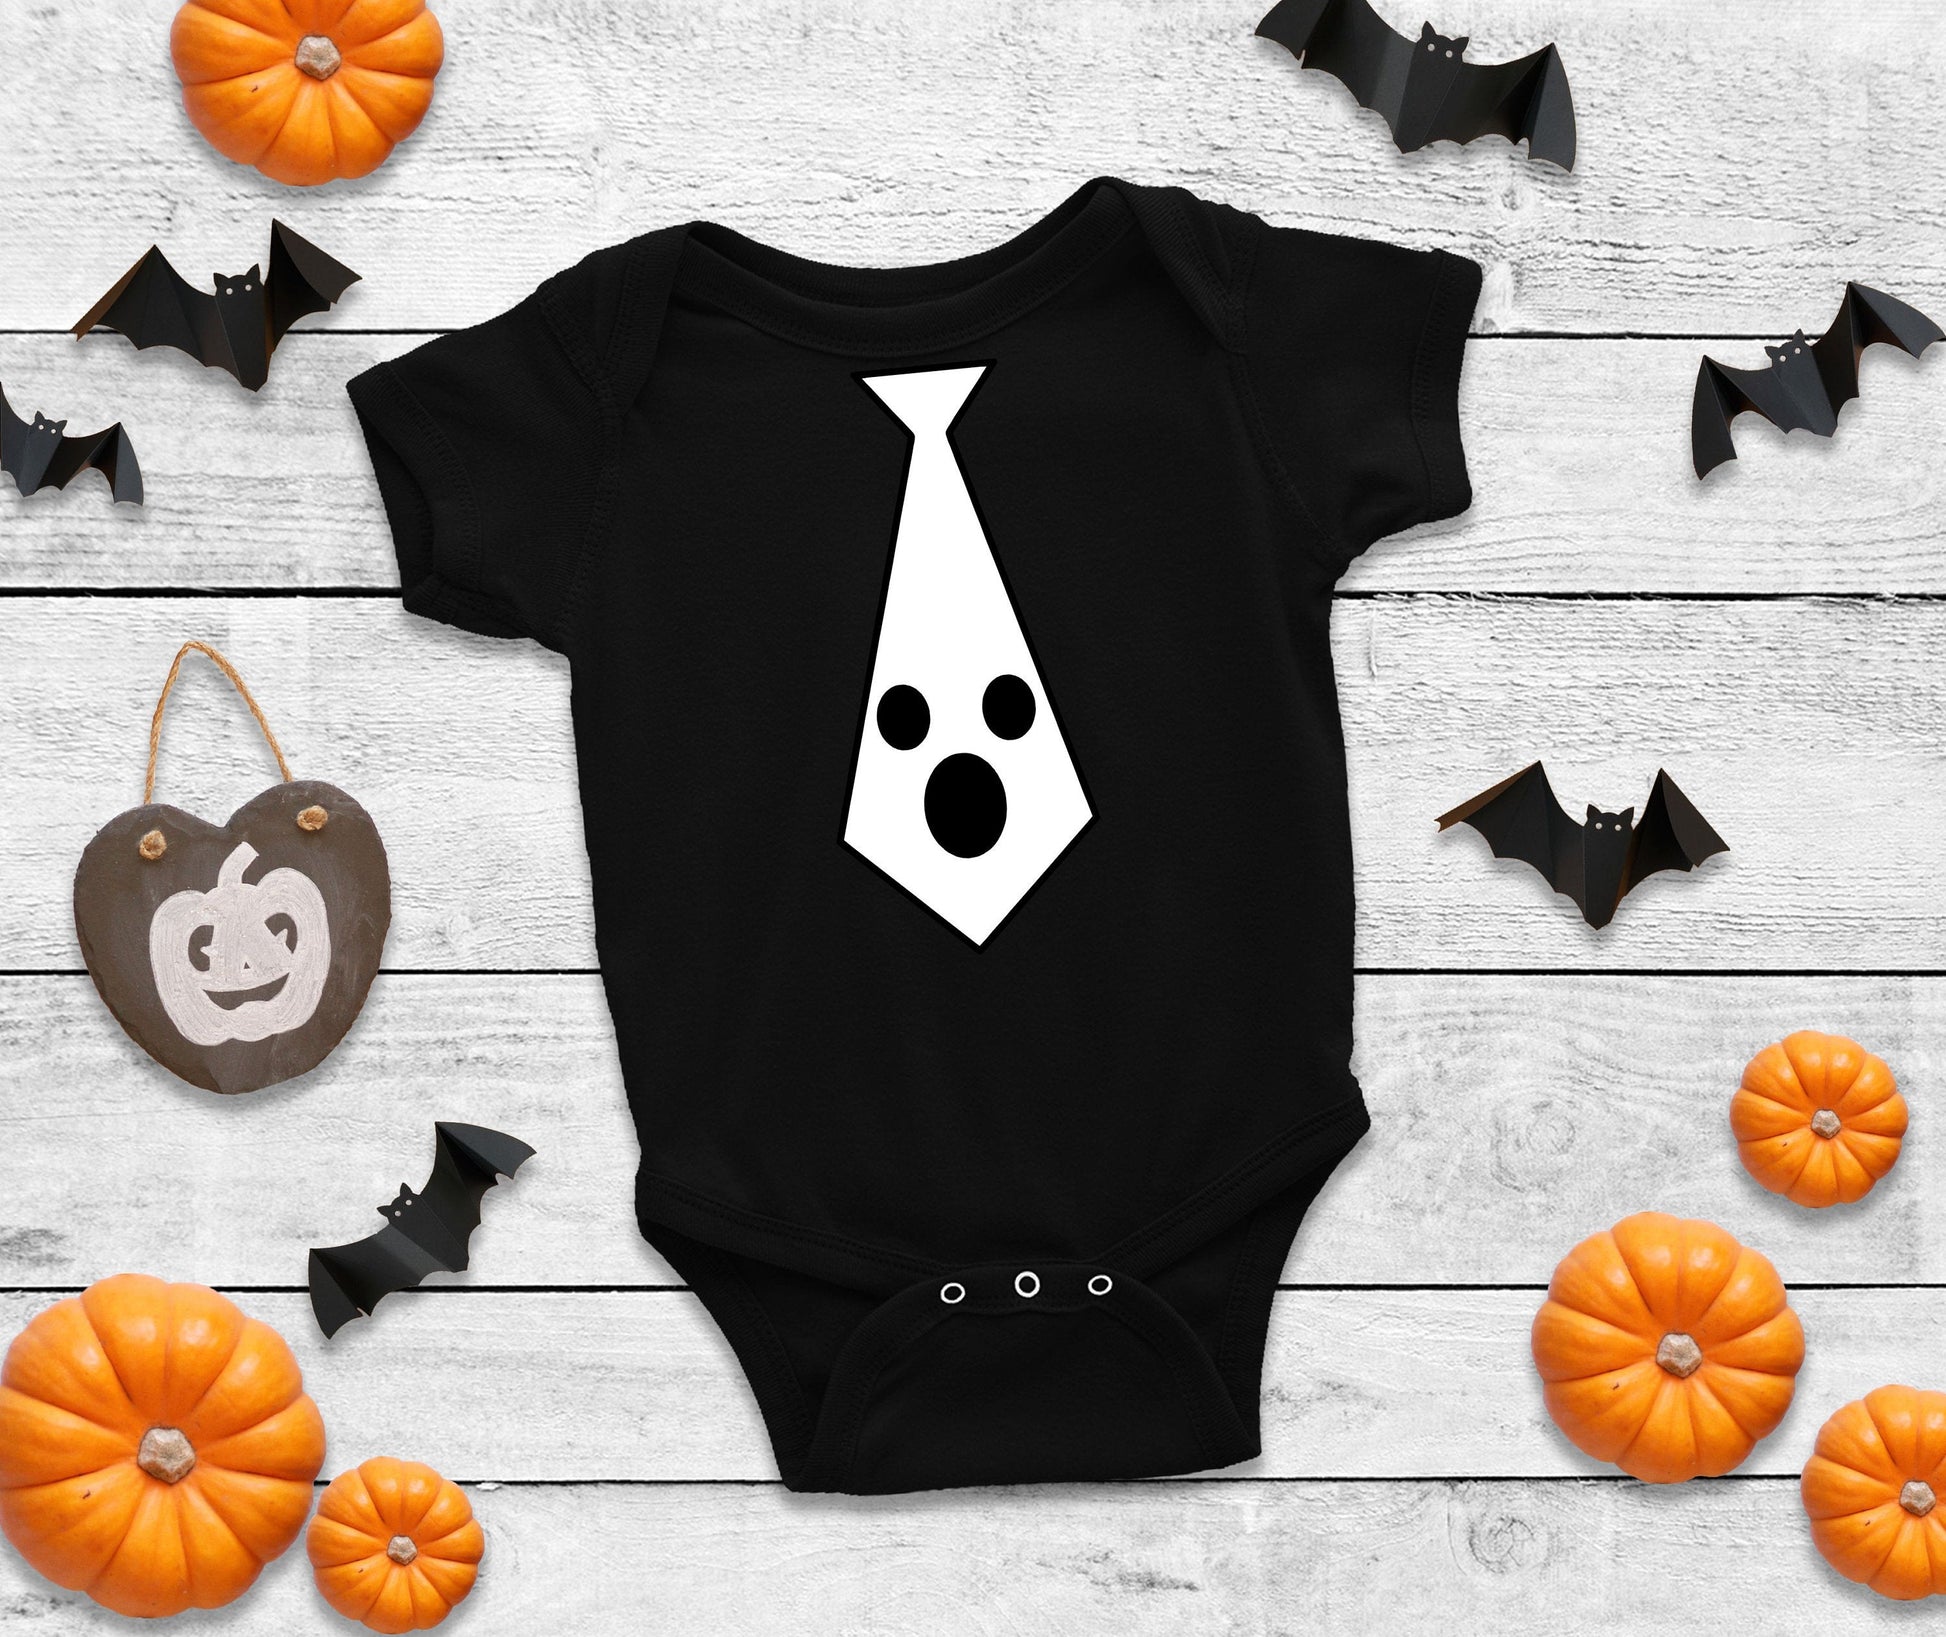 Ghost Tie Infant or Toddler Halloween Shirt or Bodysuit - My First Halloween - baby halloween - baby boy halloween shirt - toddler boy shirt